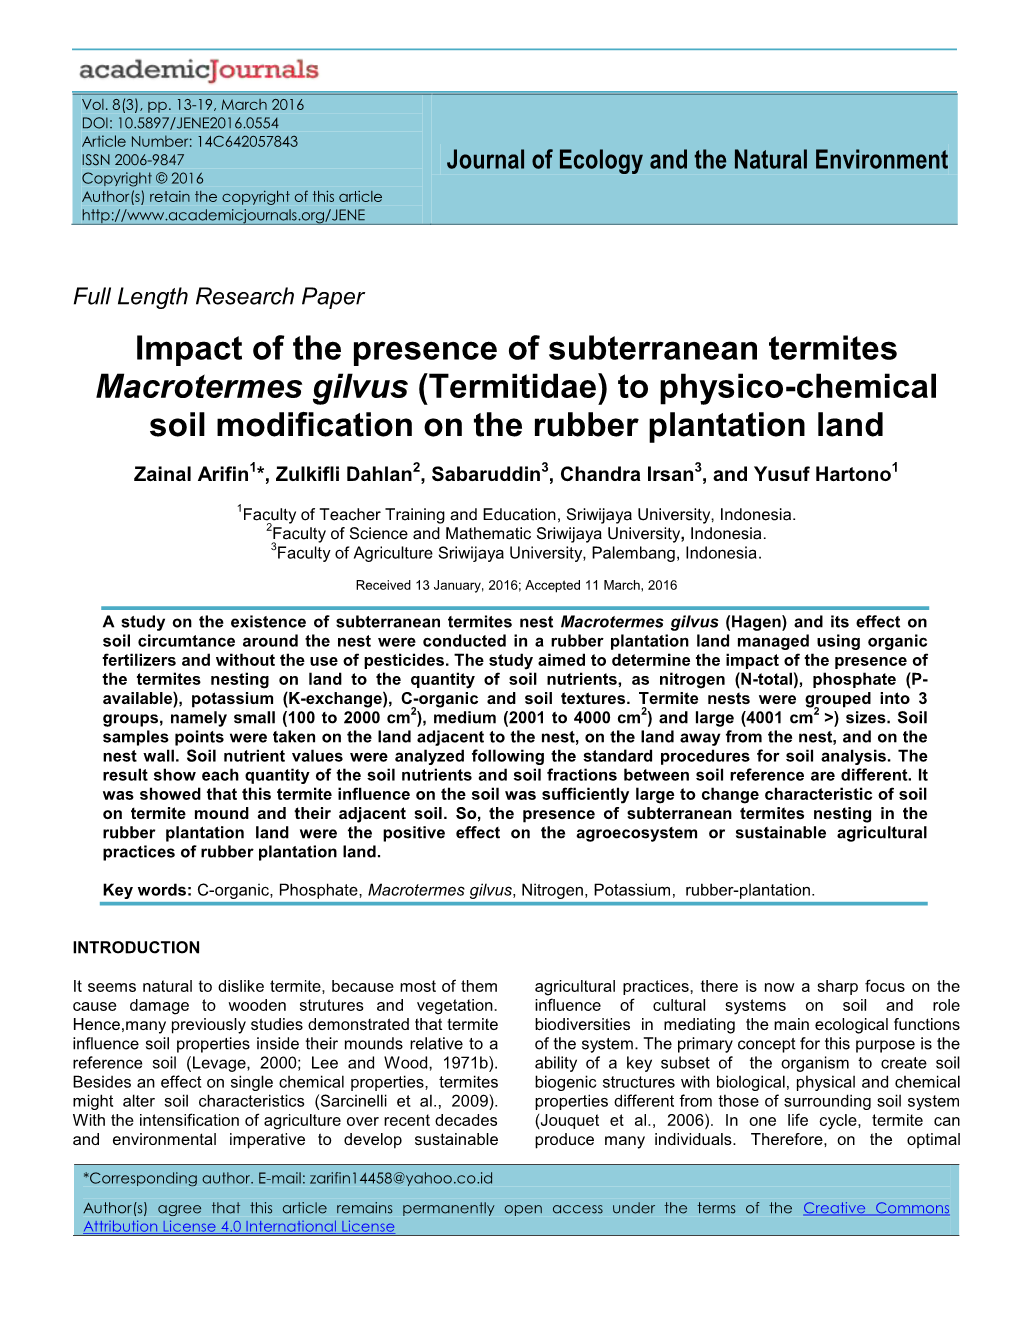 Impact of the Presence of Subterranean Termites Macrotermes Gilvus (Termitidae) to Physico-Chemical Soil Modification on the Rubber Plantation Land